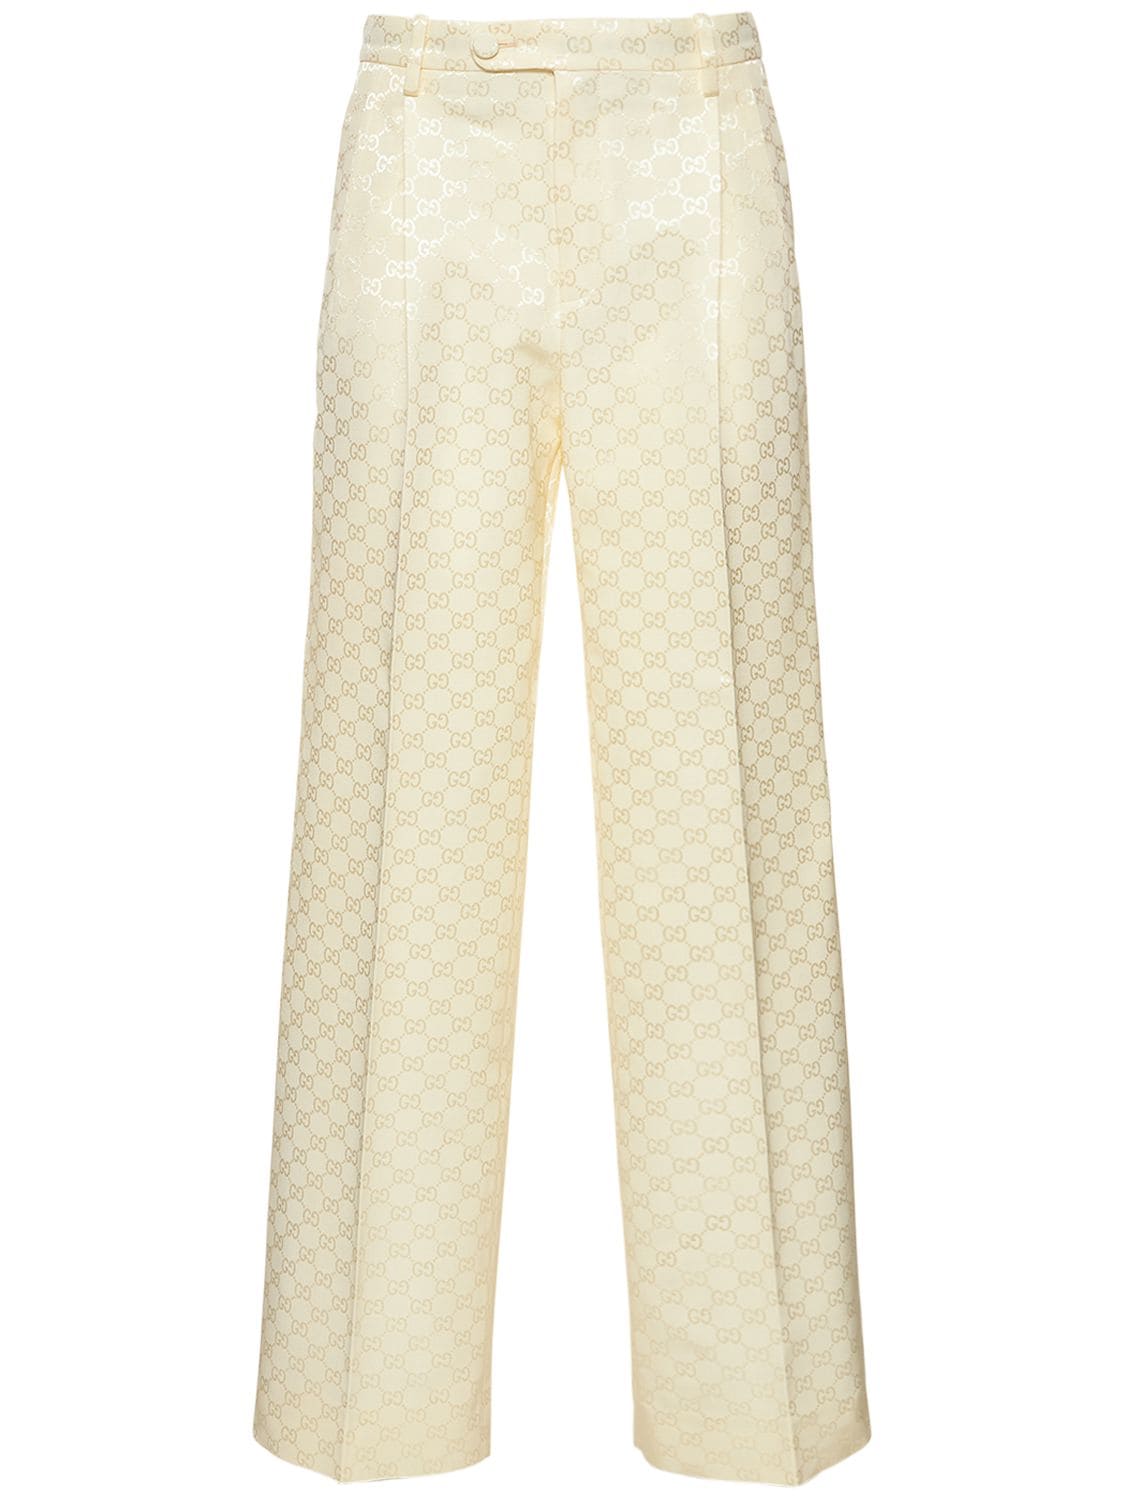 Image of Gg Cotton Blend Pants